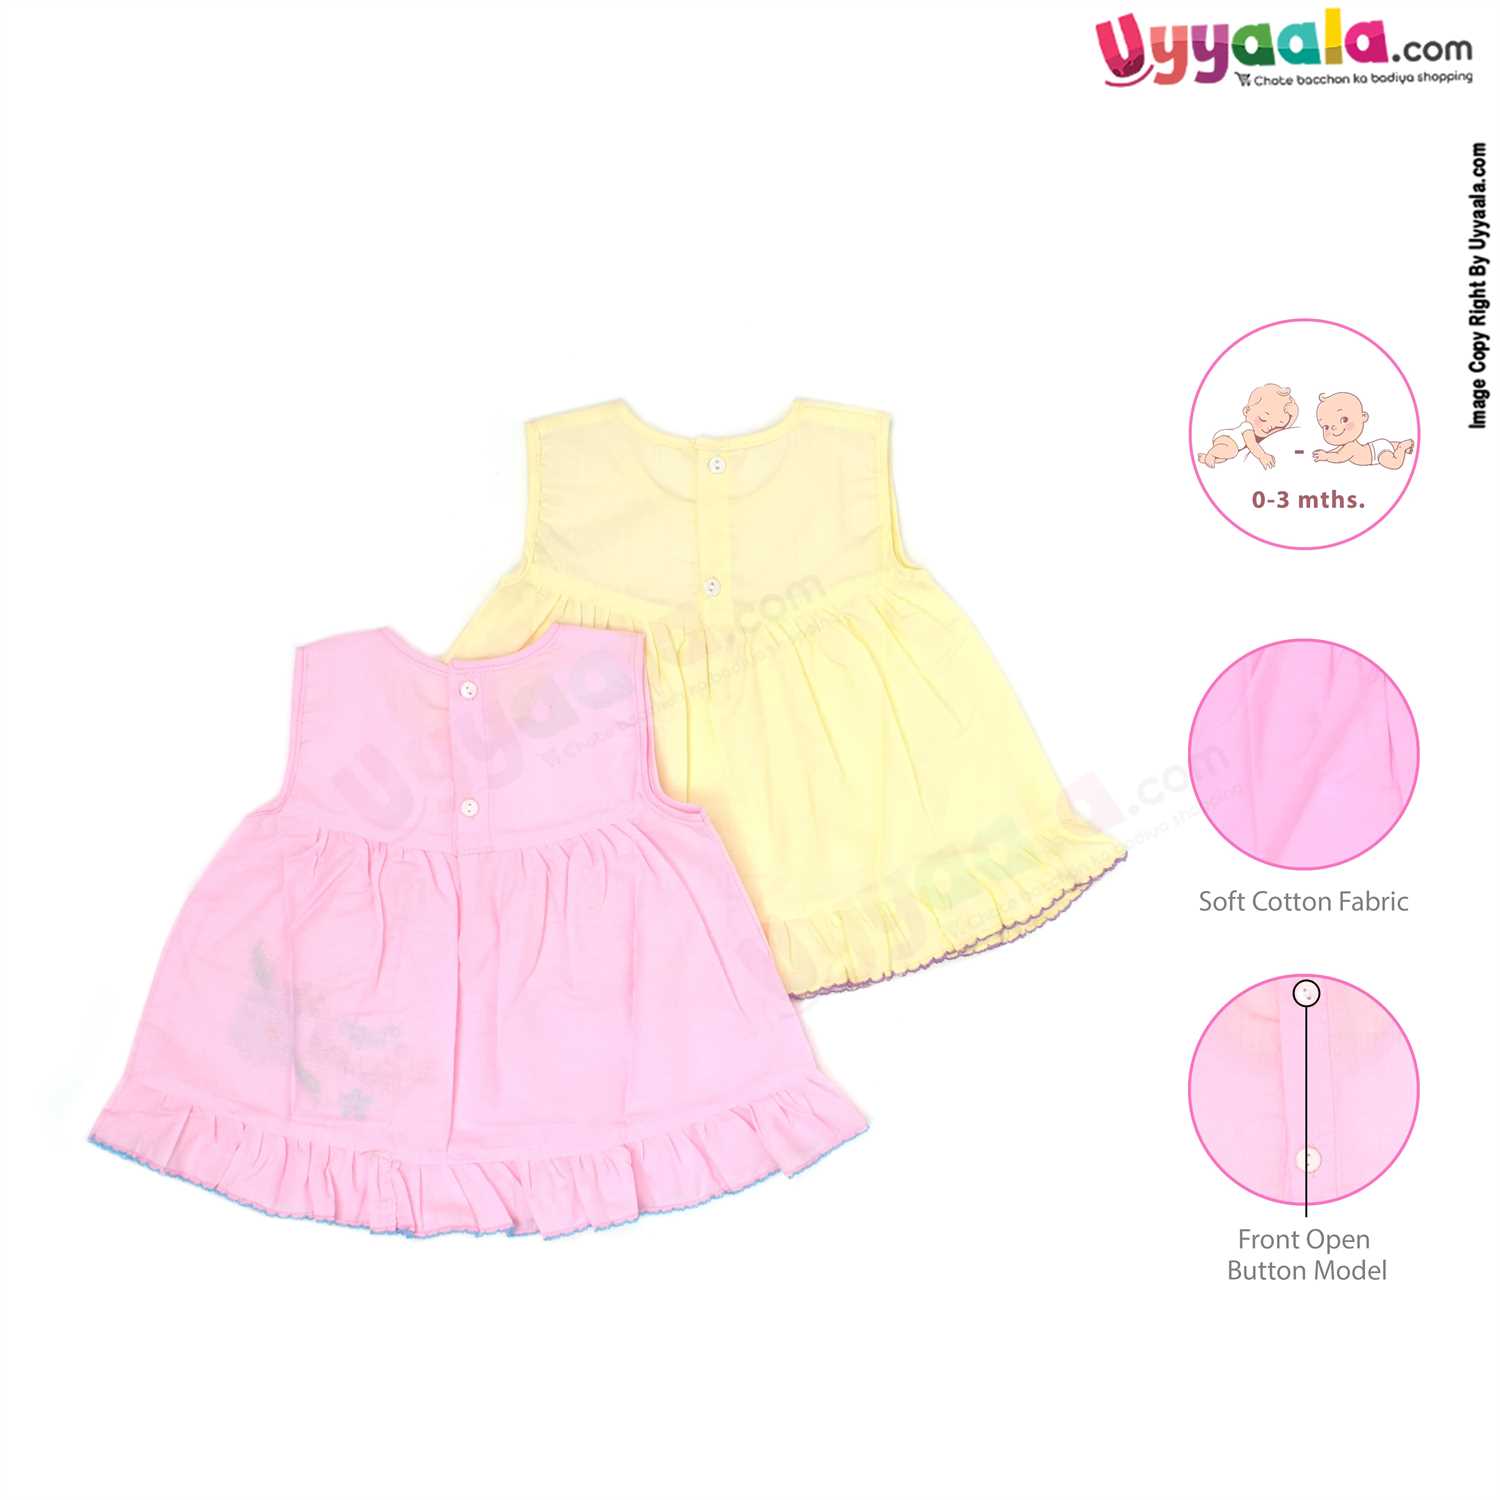 Half Sleeve Baby Frock Back Open Button model , Premium Quality Soft Hosiery Cotton Flower Print 2 Pack - Pink & Yellow (0-3M)